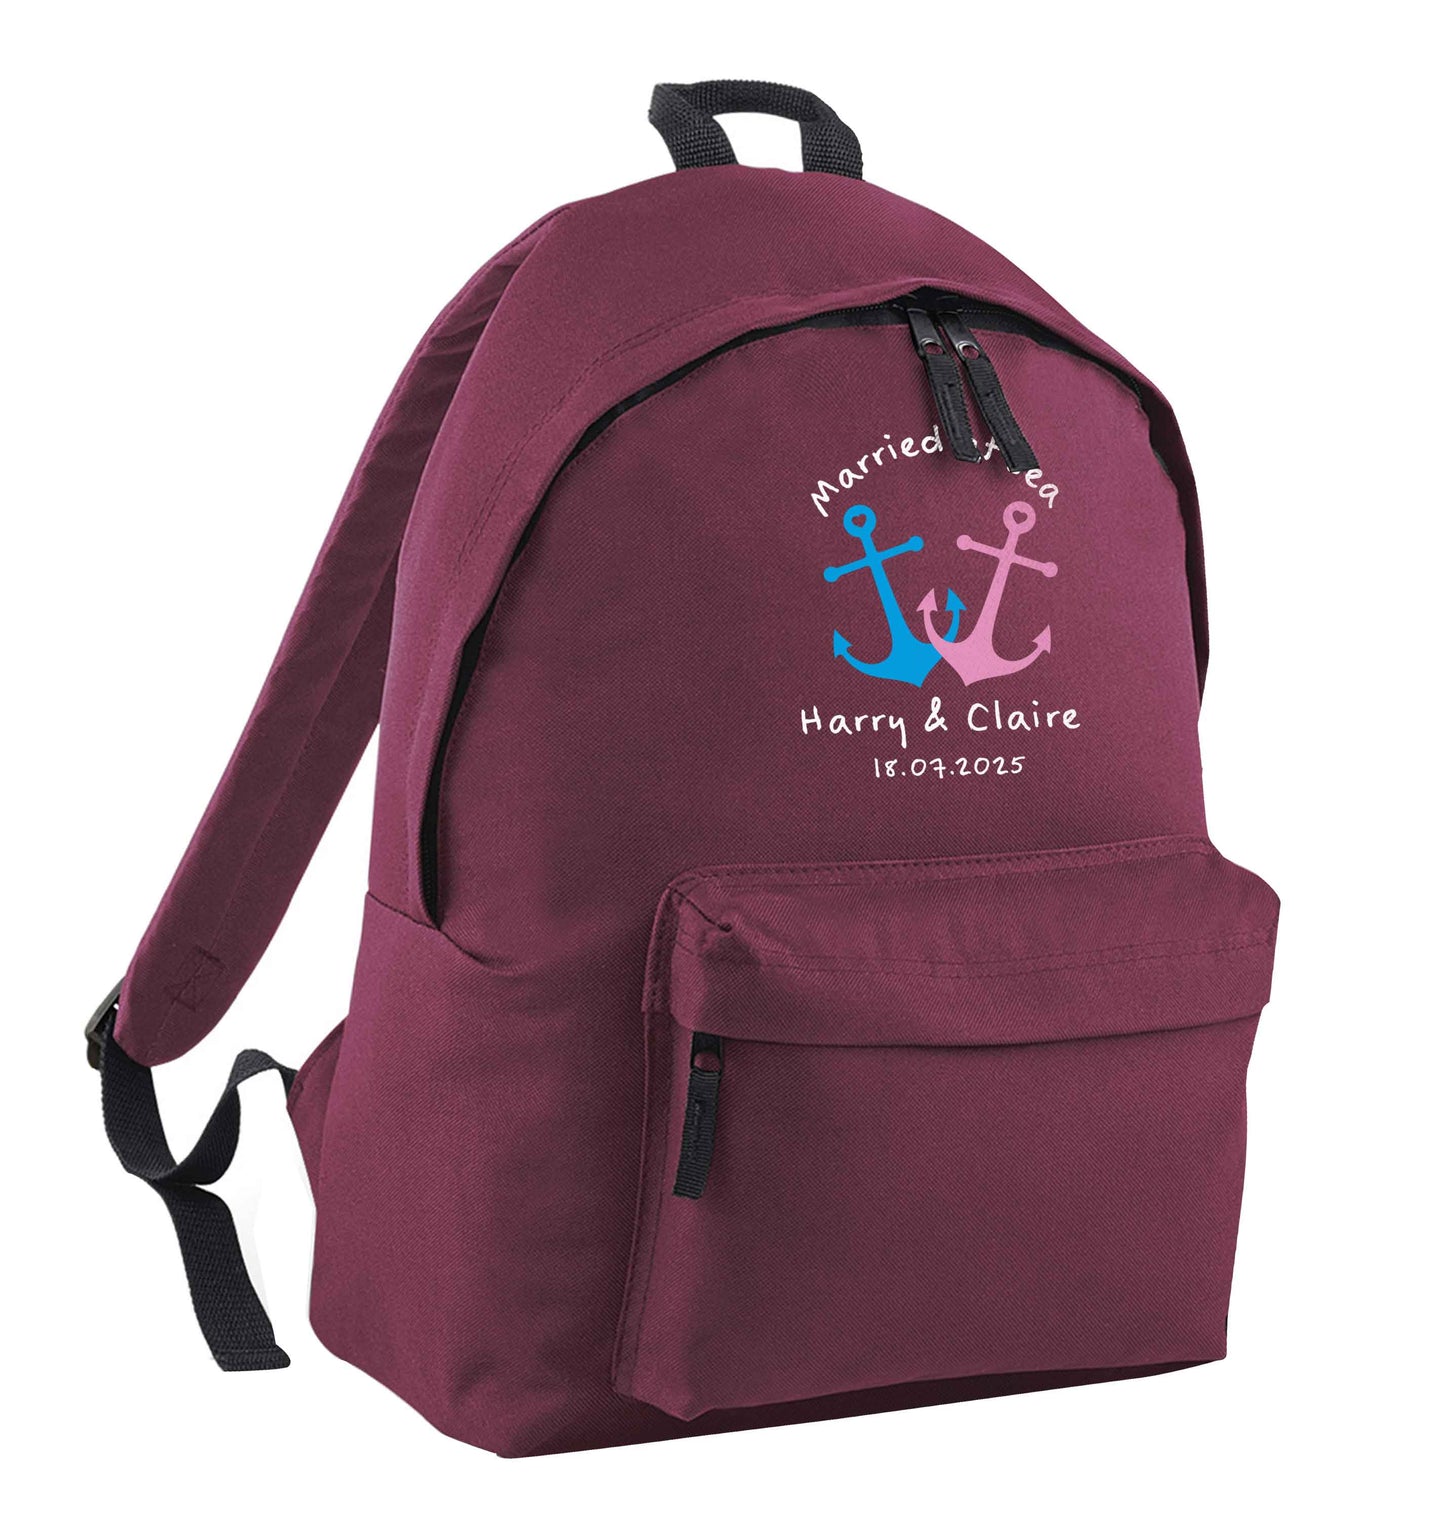 Married at sea maroon adults backpack